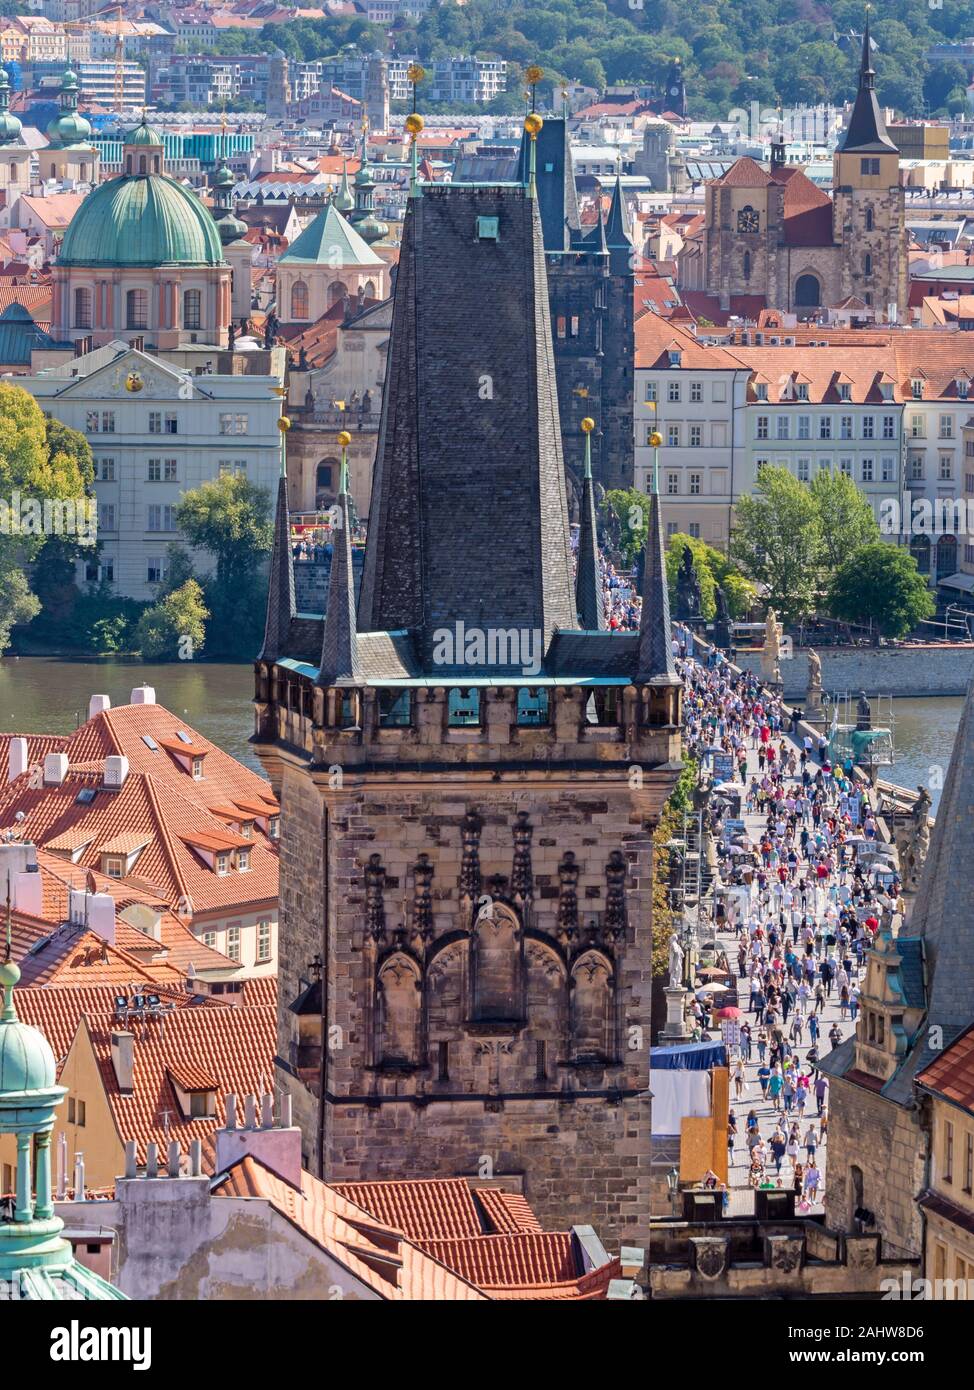 PRAGUE, CZECH REPUBLIC - SEPTEMBER 4: Tourists at the Charles Bridge in Prague, Czech Republic on September 4. Foto taken from Mala Strana with view t Stock Photo